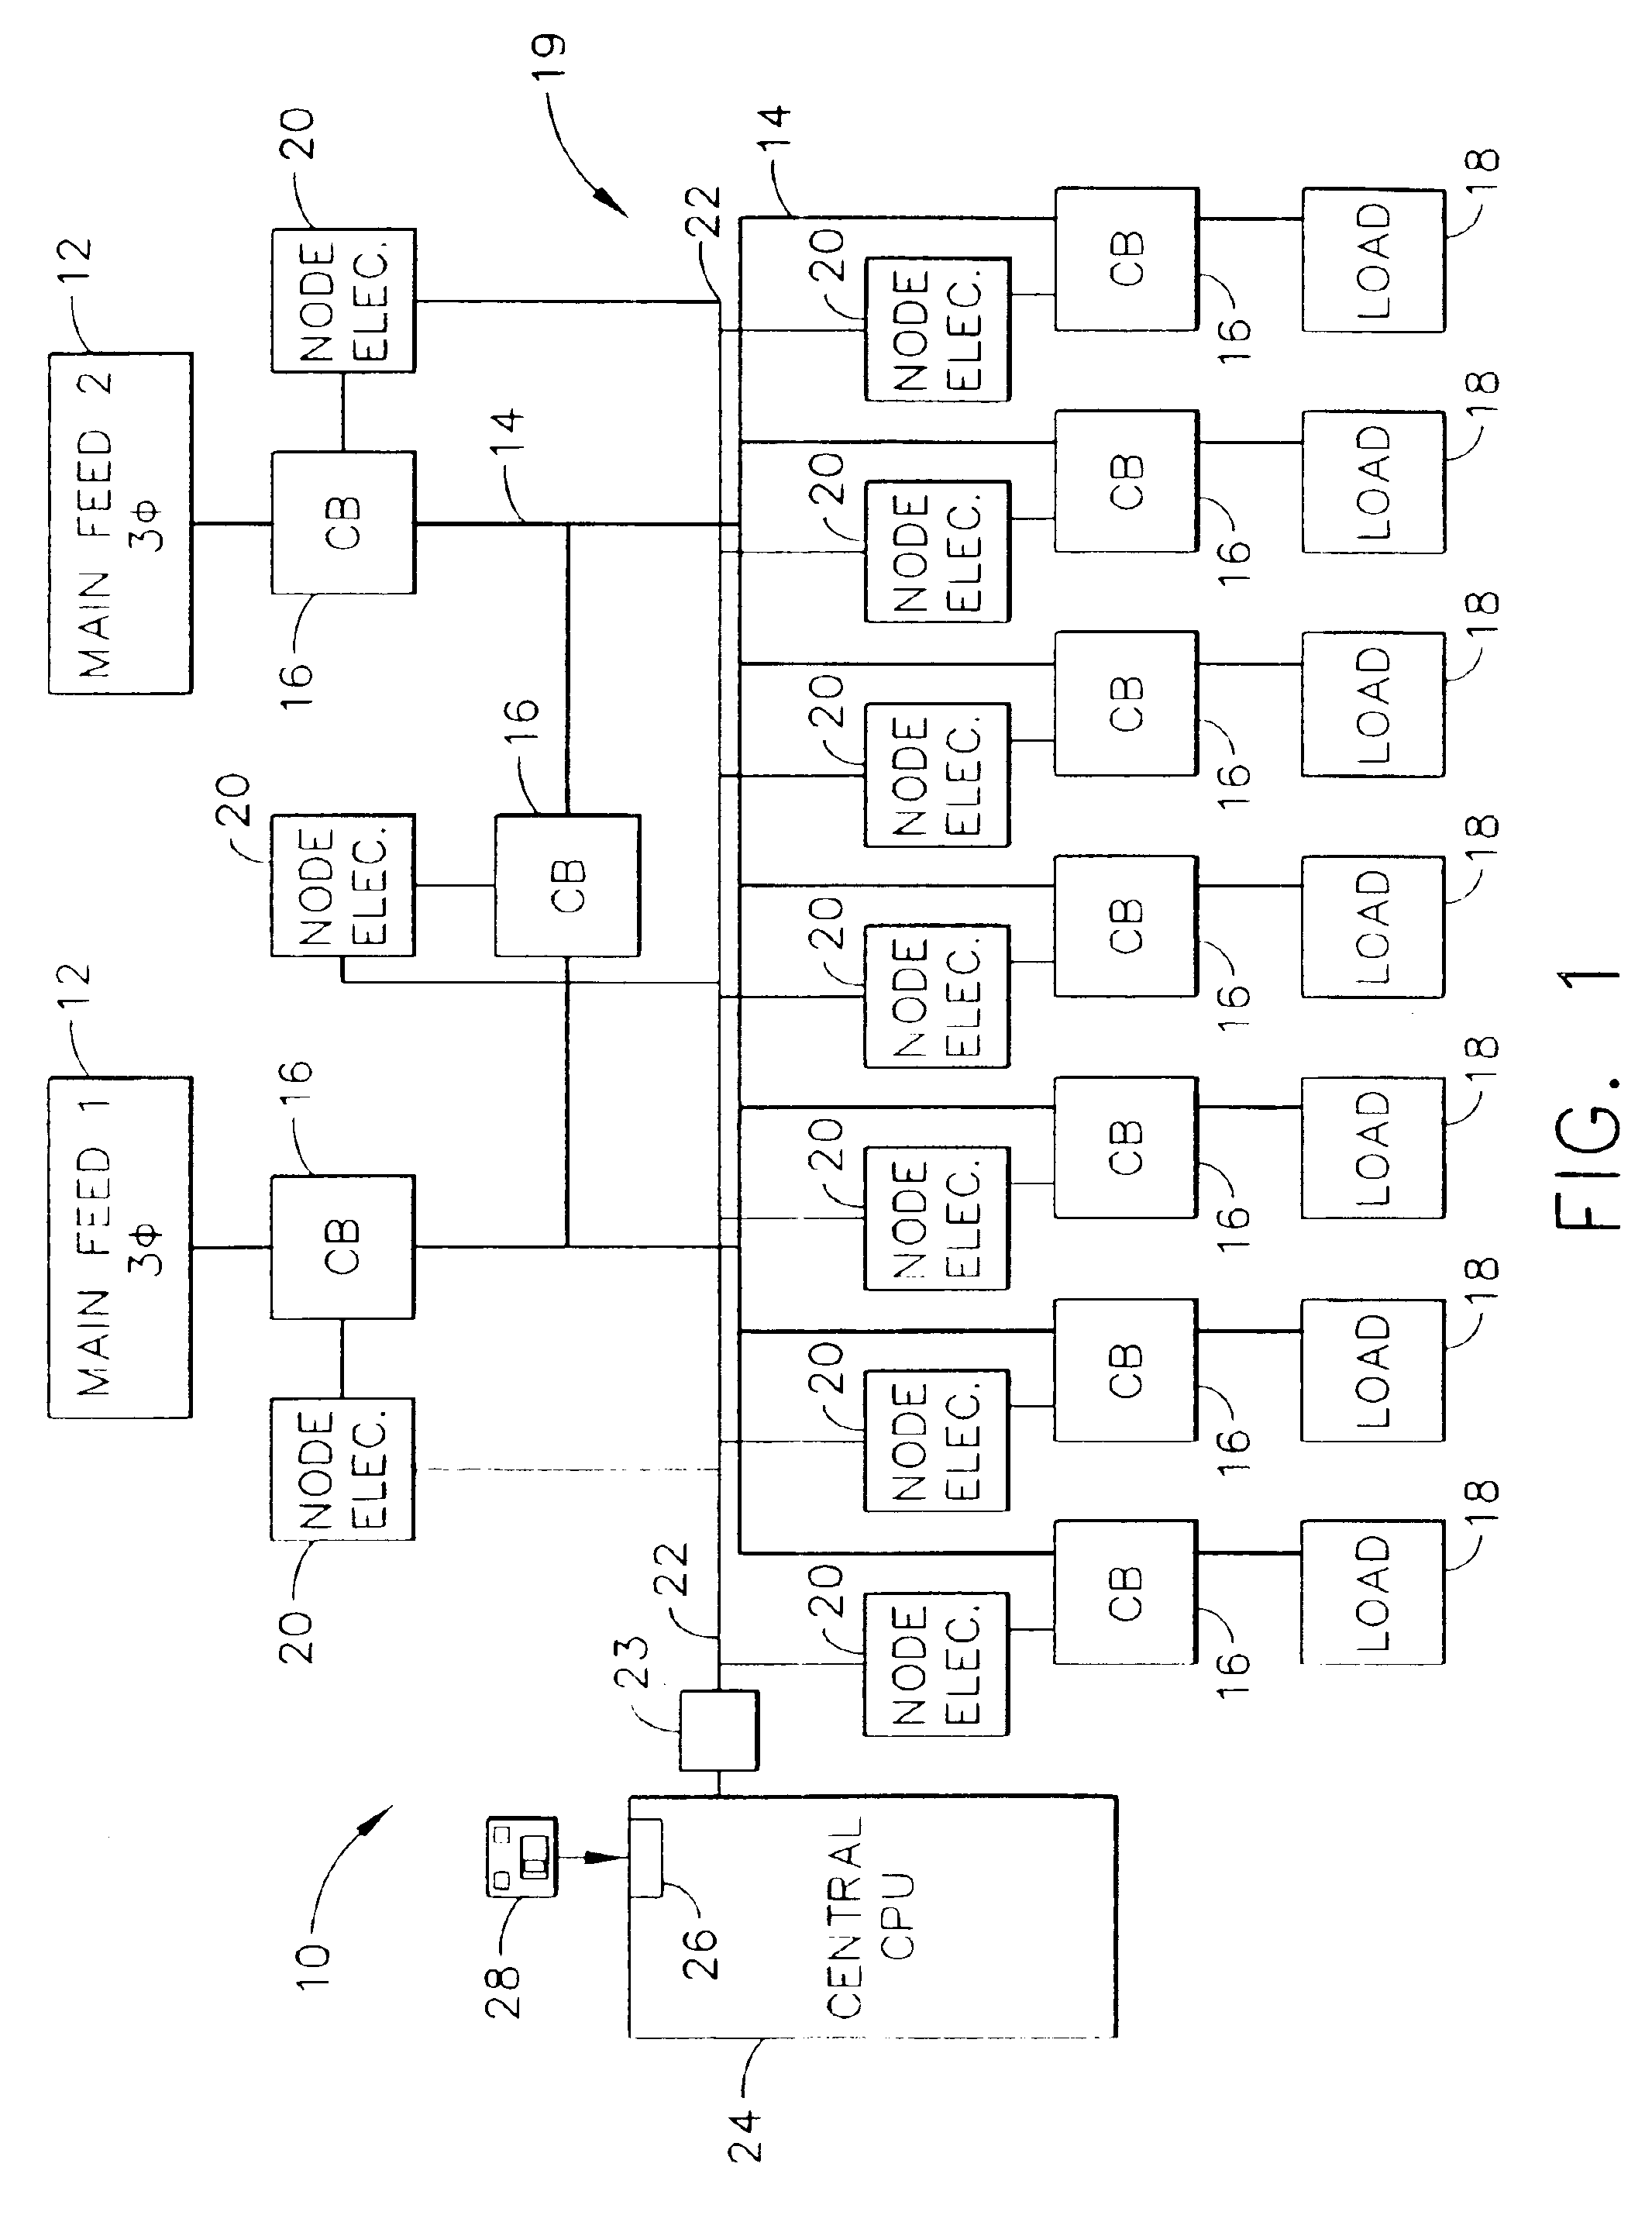 Method and apparatus for optimized centralized critical control architecture for switchgear and power equipment